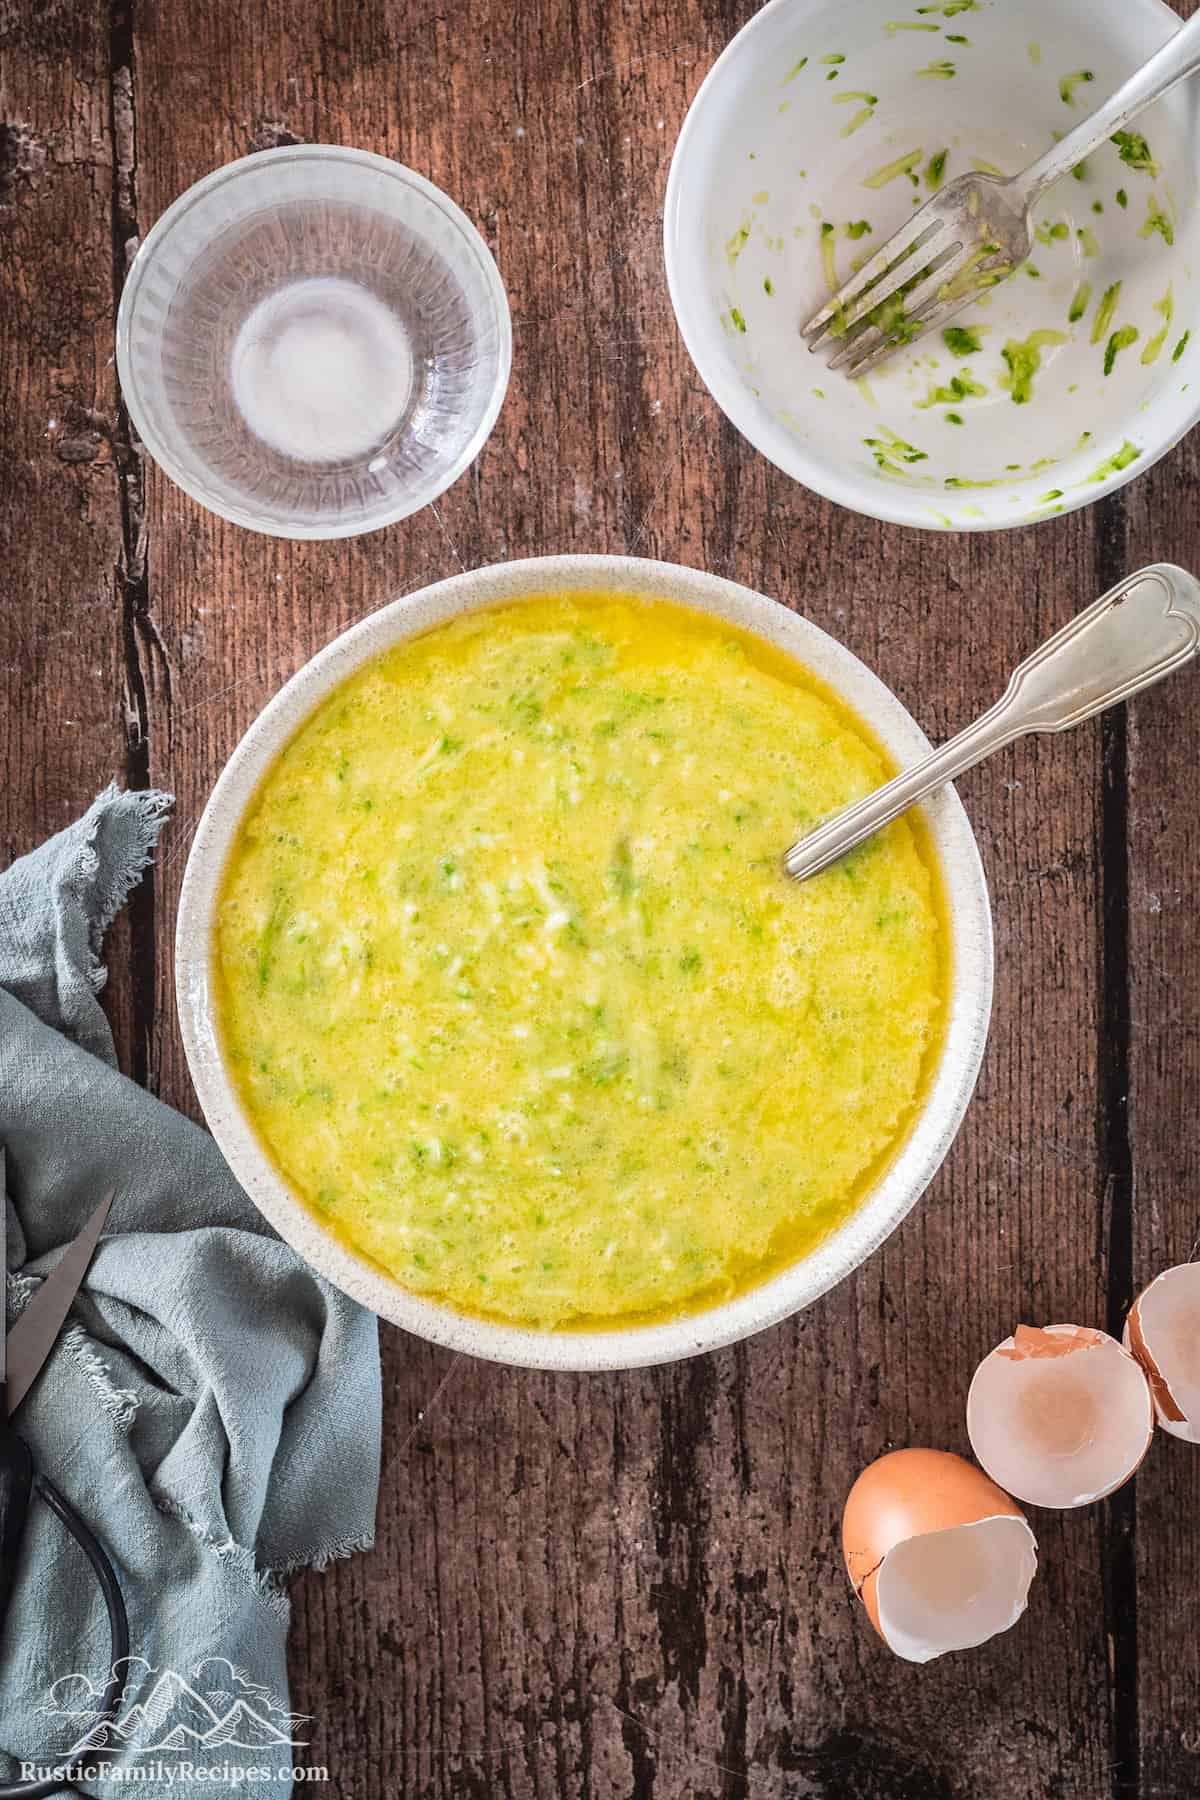 A bowl full of the zucchini and buttermilk mixture